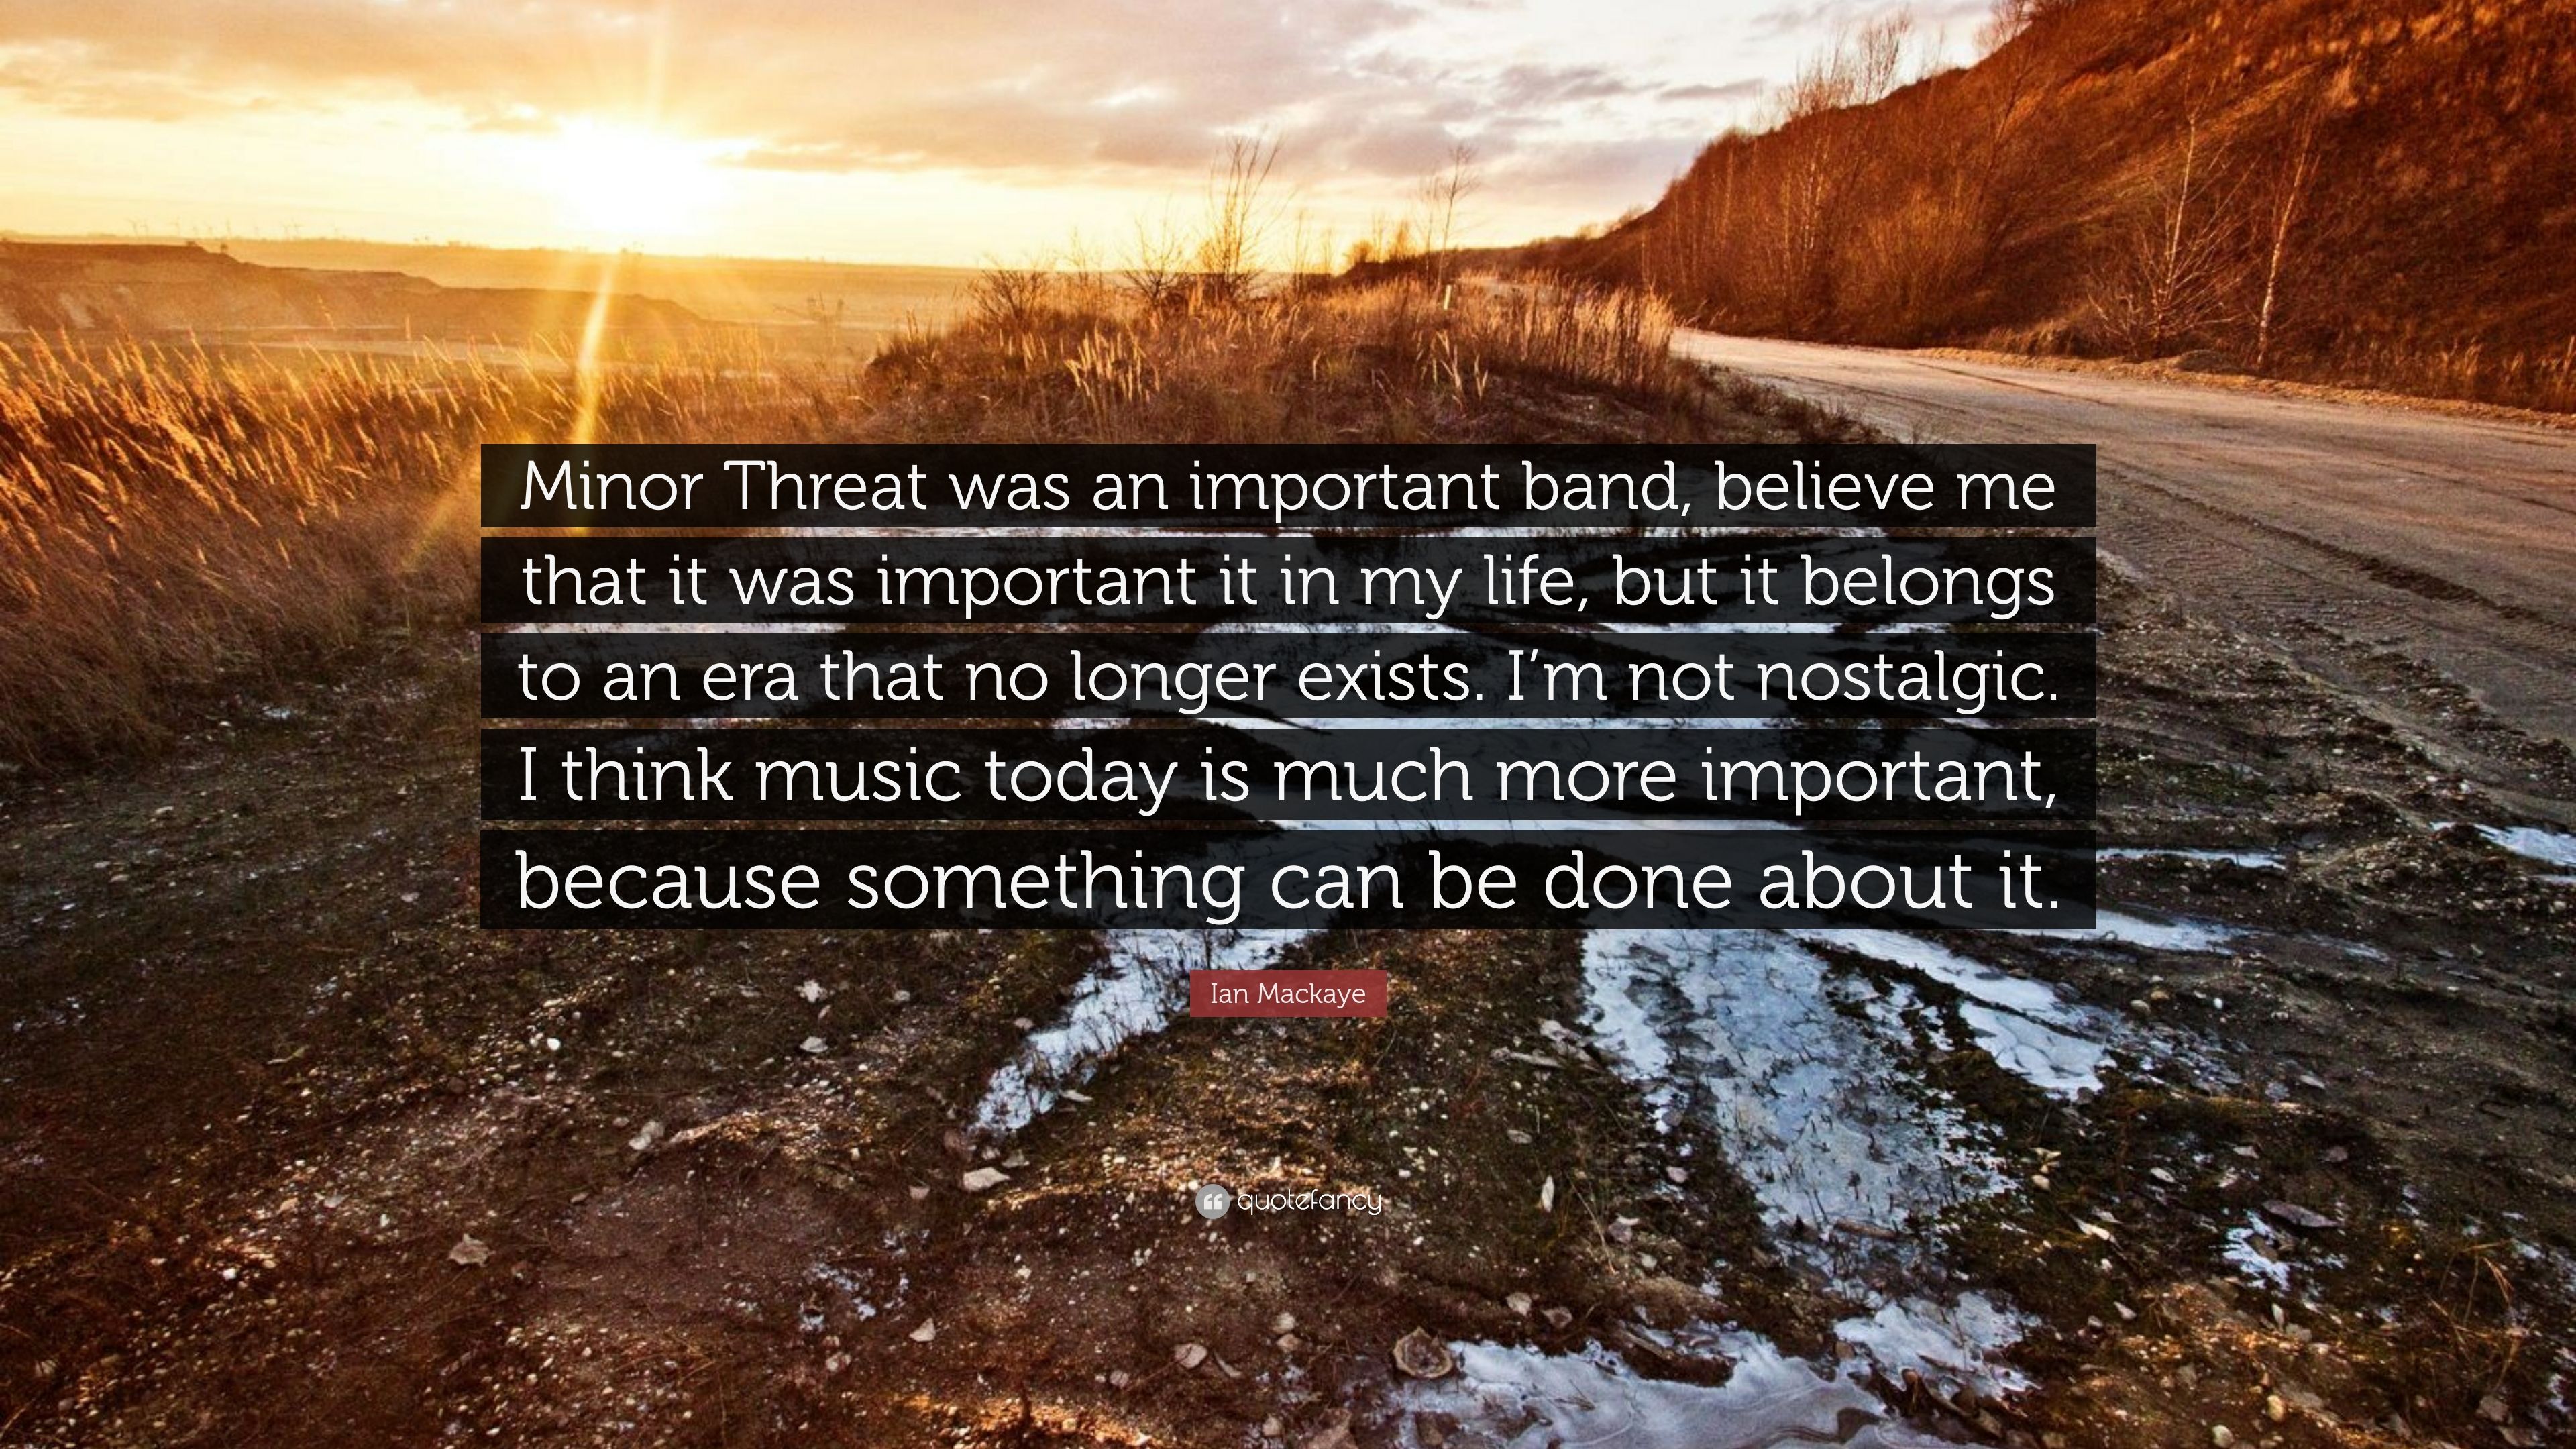 Ian Mackaye Quote: “Minor Threat was an important band, believe me